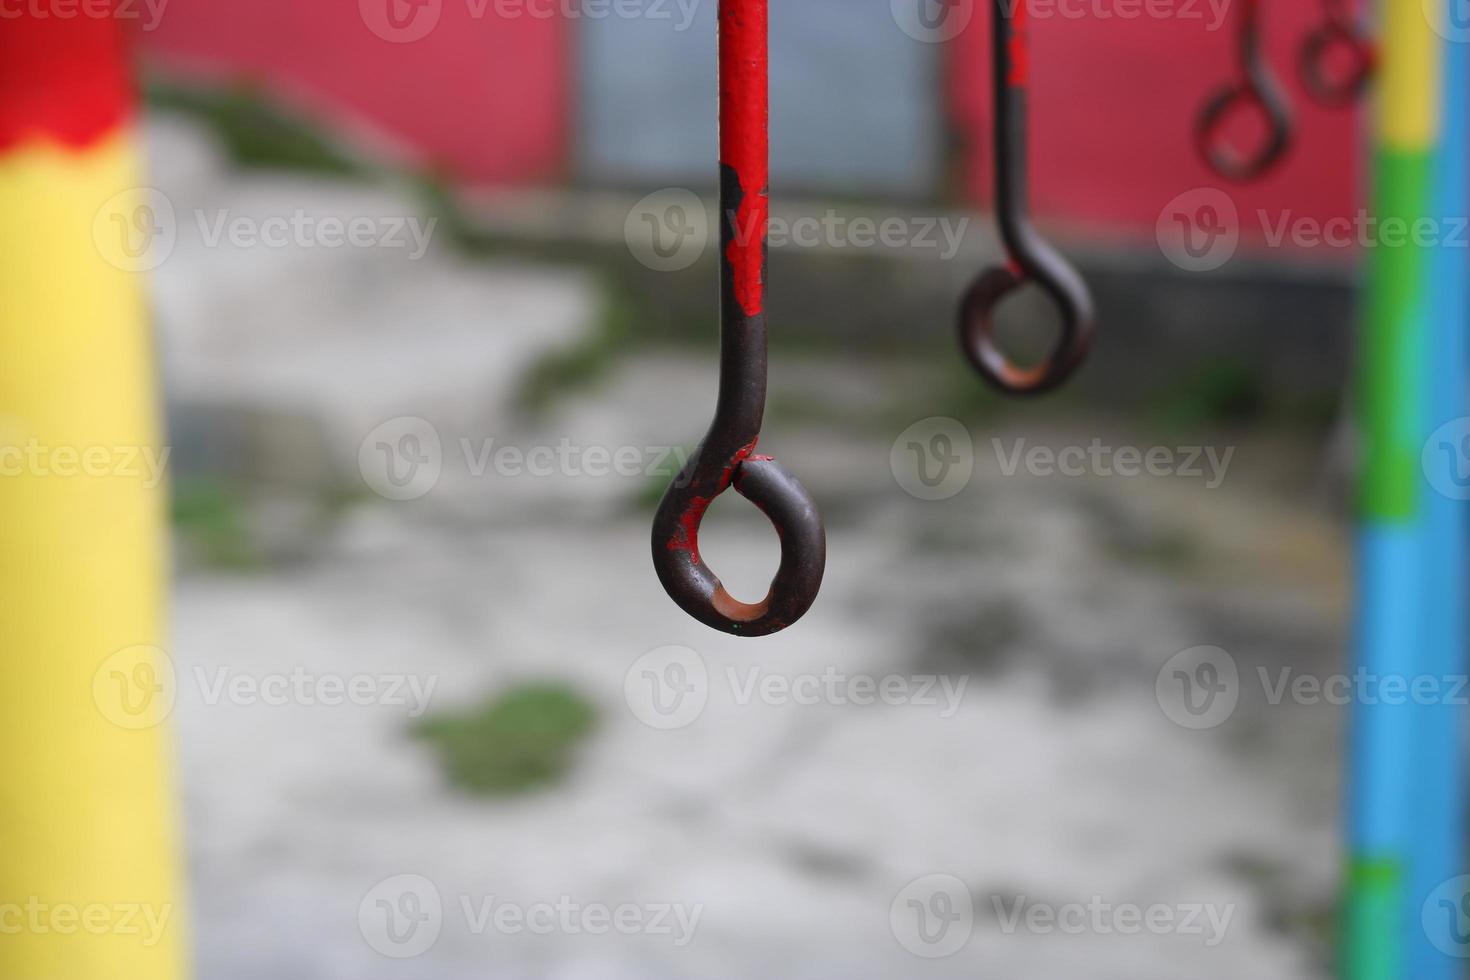 photo of an old iron hanger in a children's playground